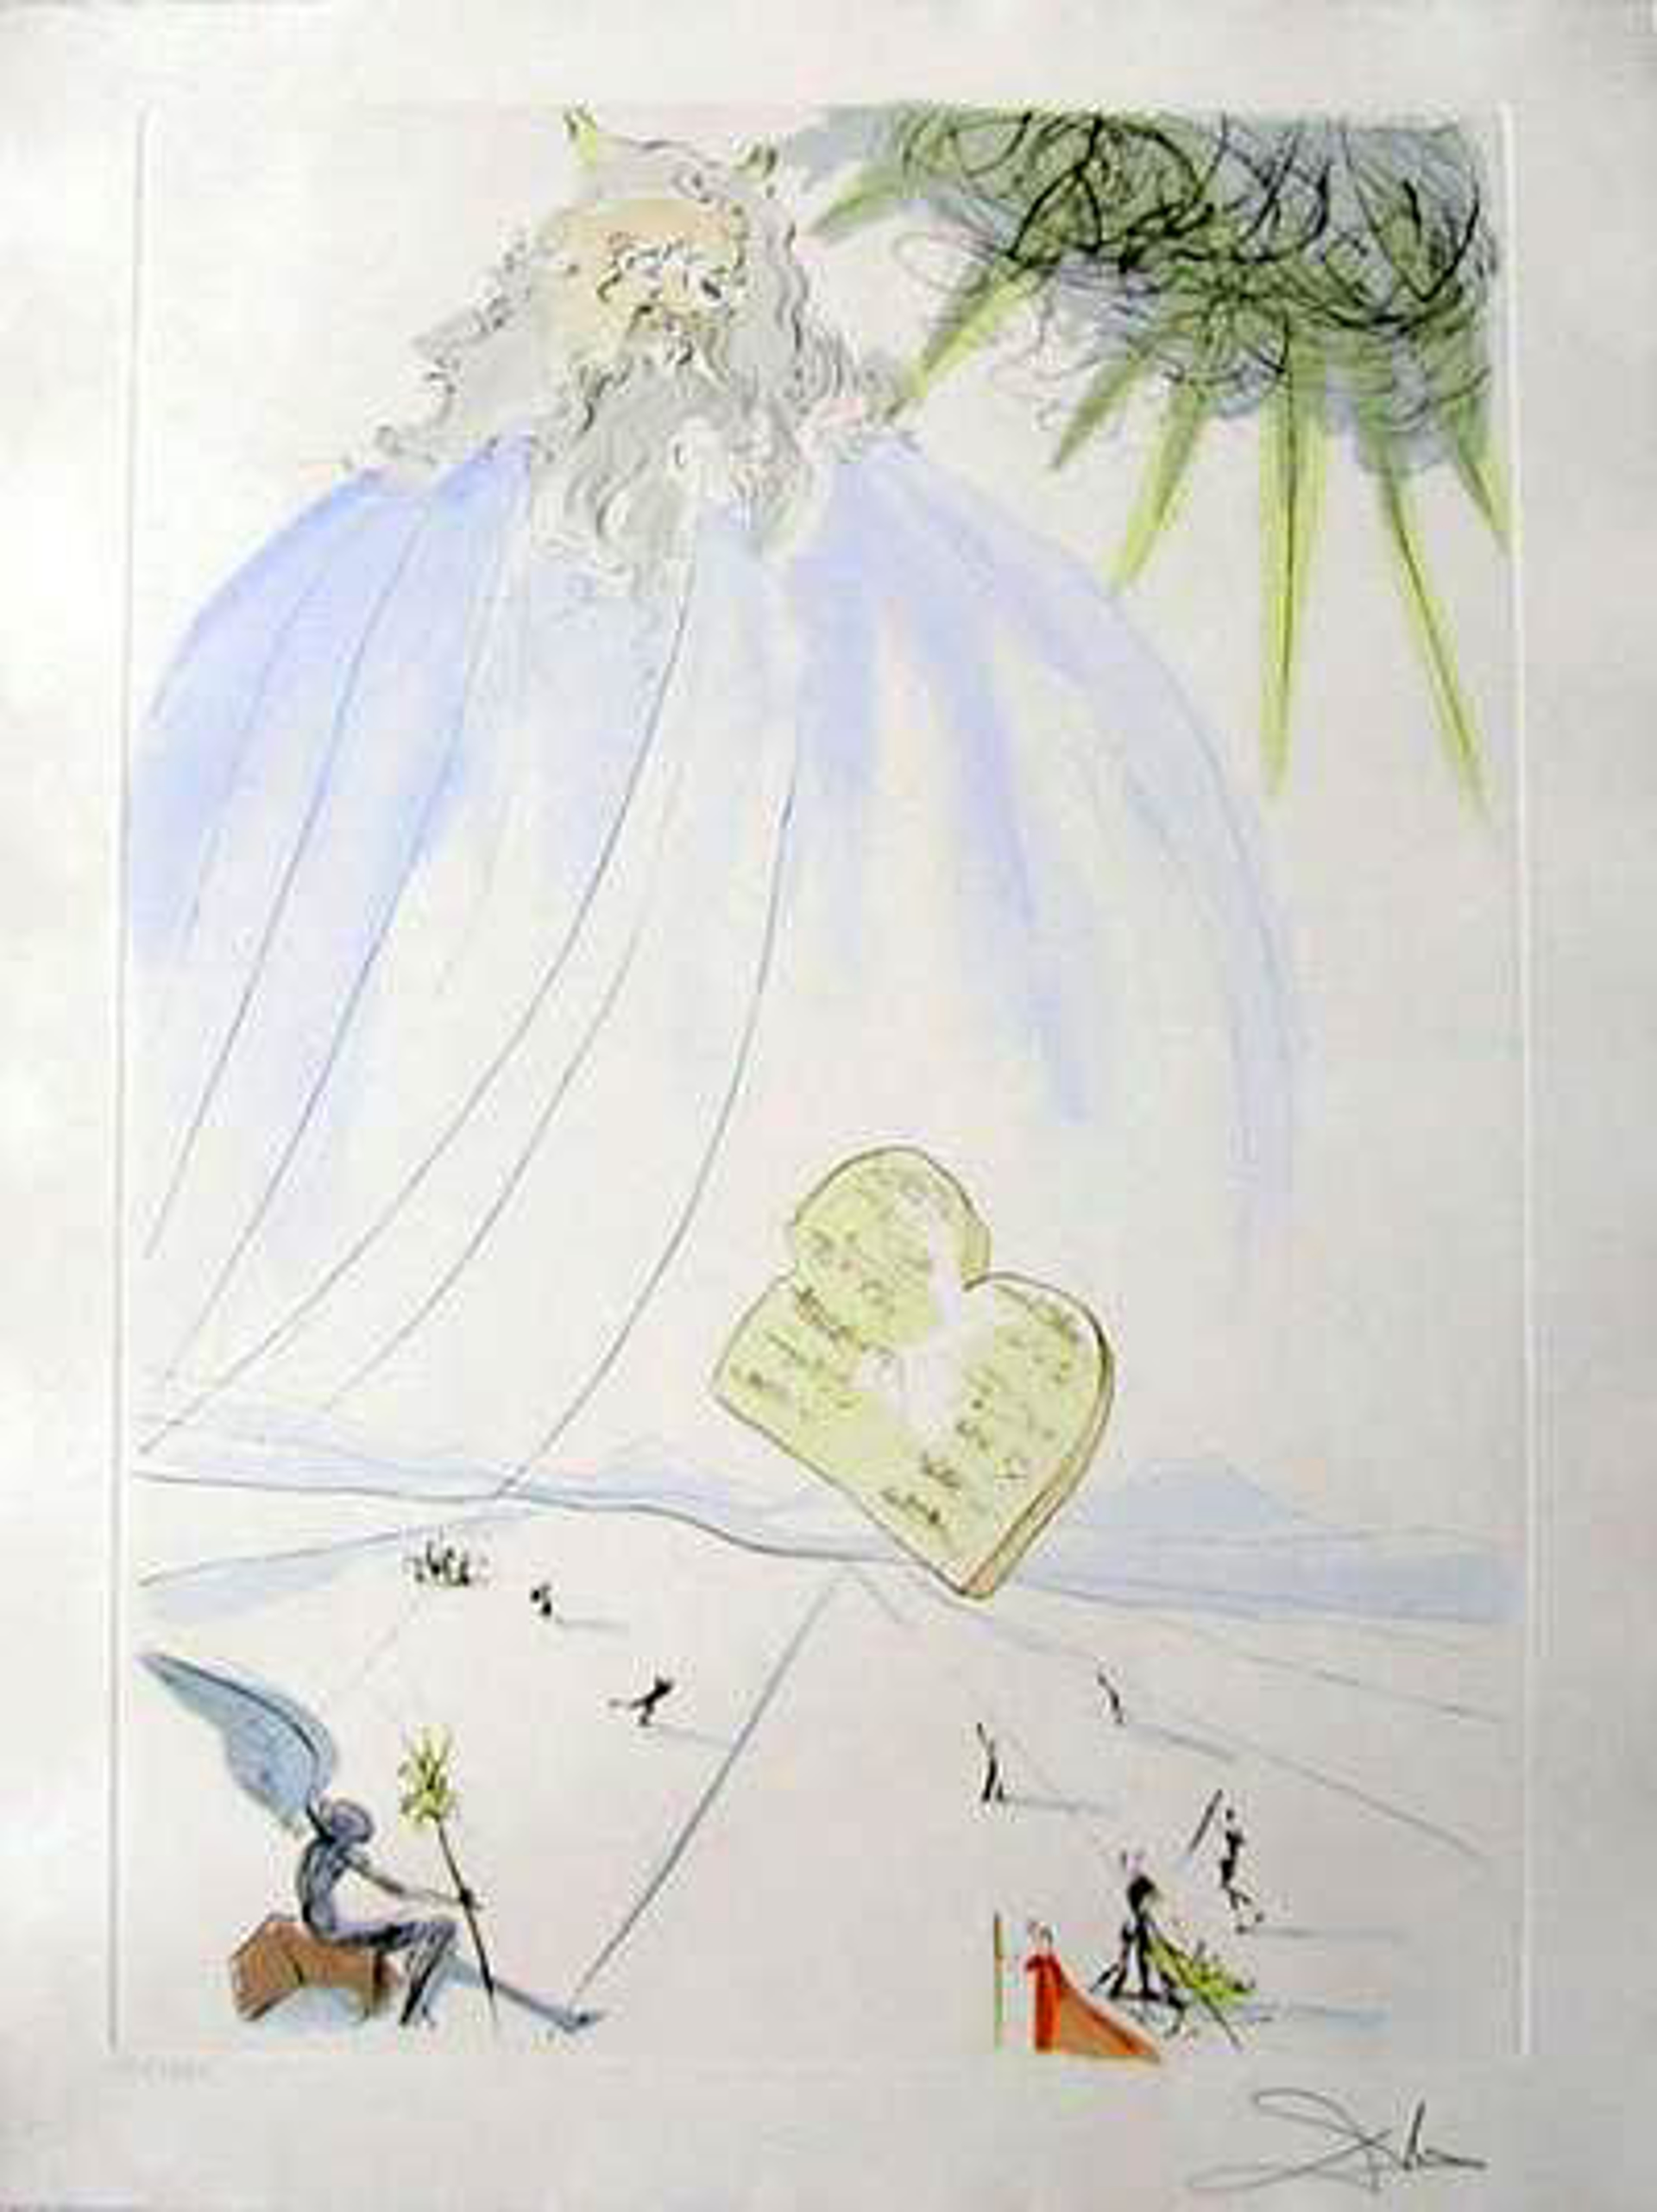 Moses (from Our Historical Heritage, suite of 11) by Salvador Dali